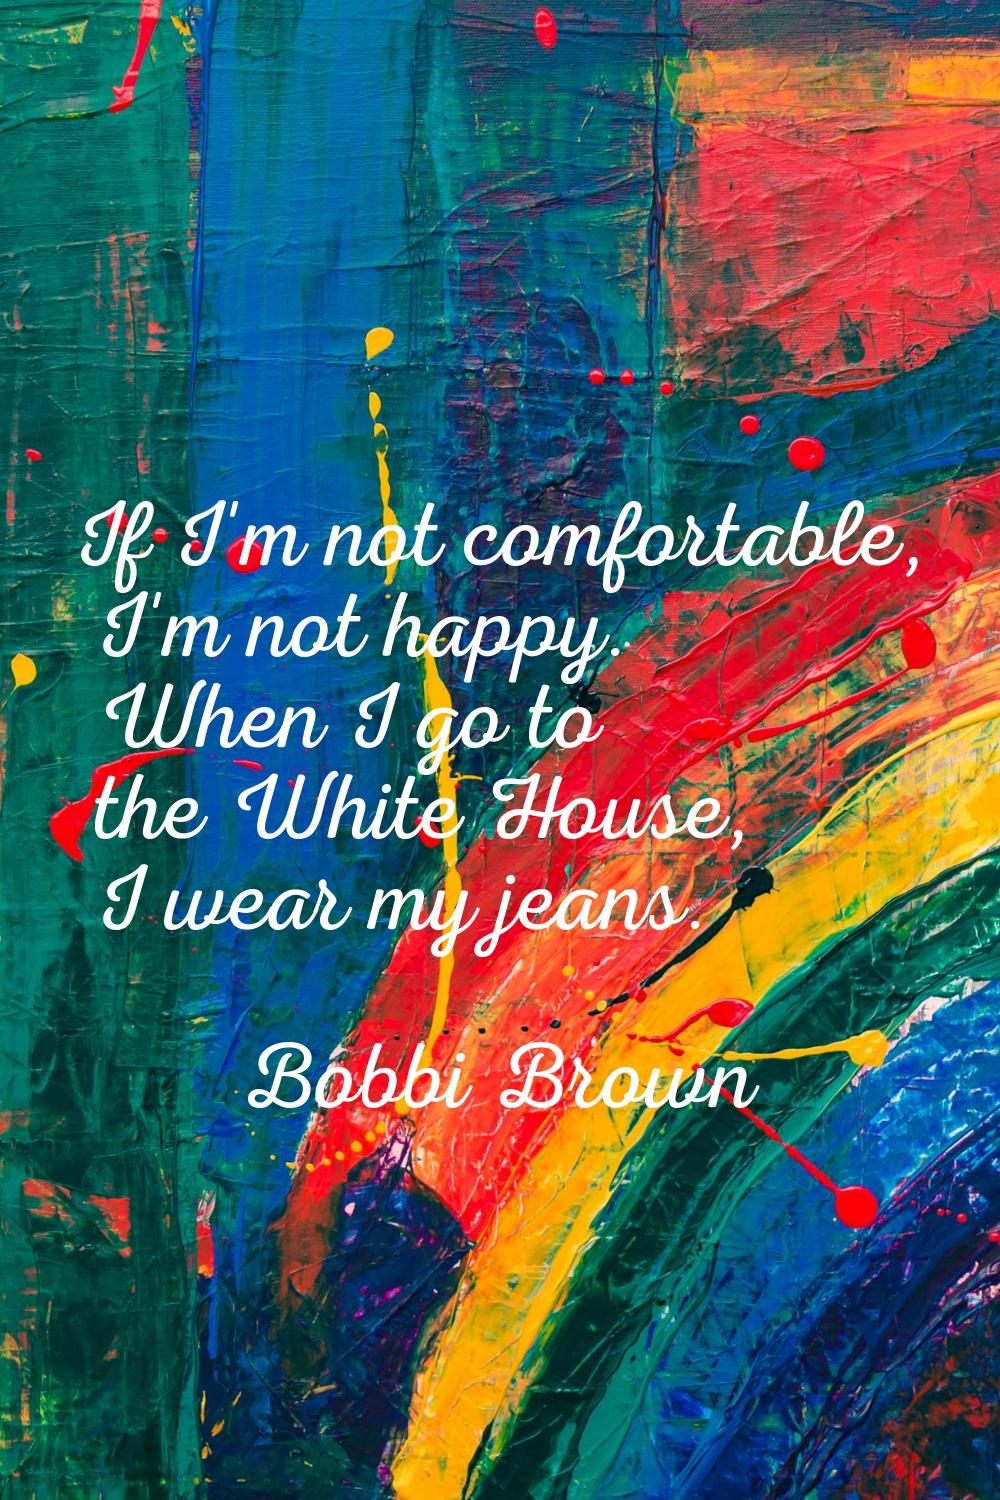 If I'm not comfortable, I'm not happy. When I go to the White House, I wear my jeans.